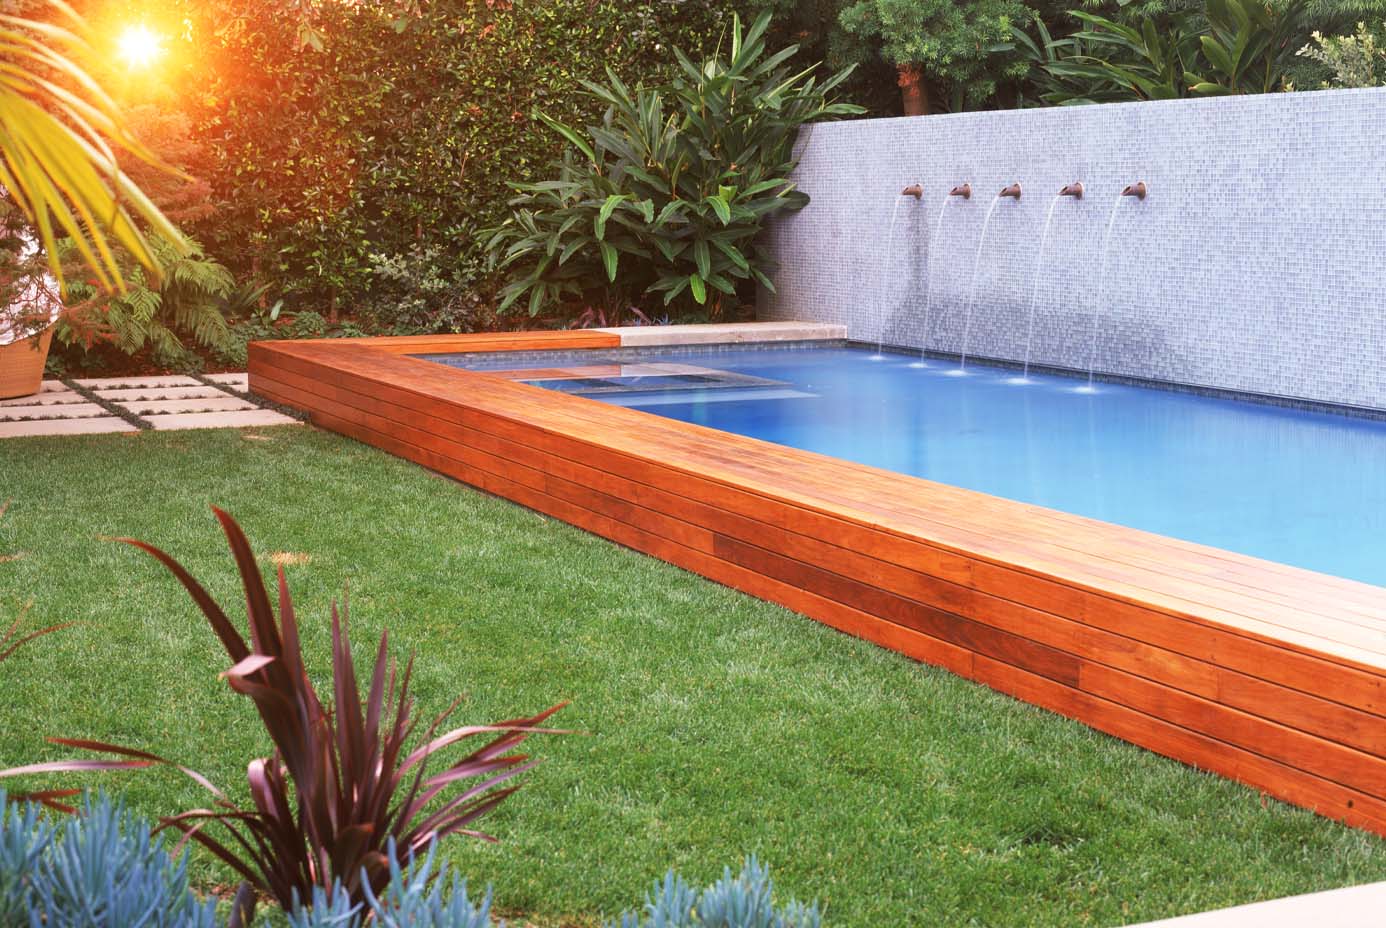 Pool garden: A wood pool surround and tiled wall contrast beautifully with a sunken lawn and exotic plantings.